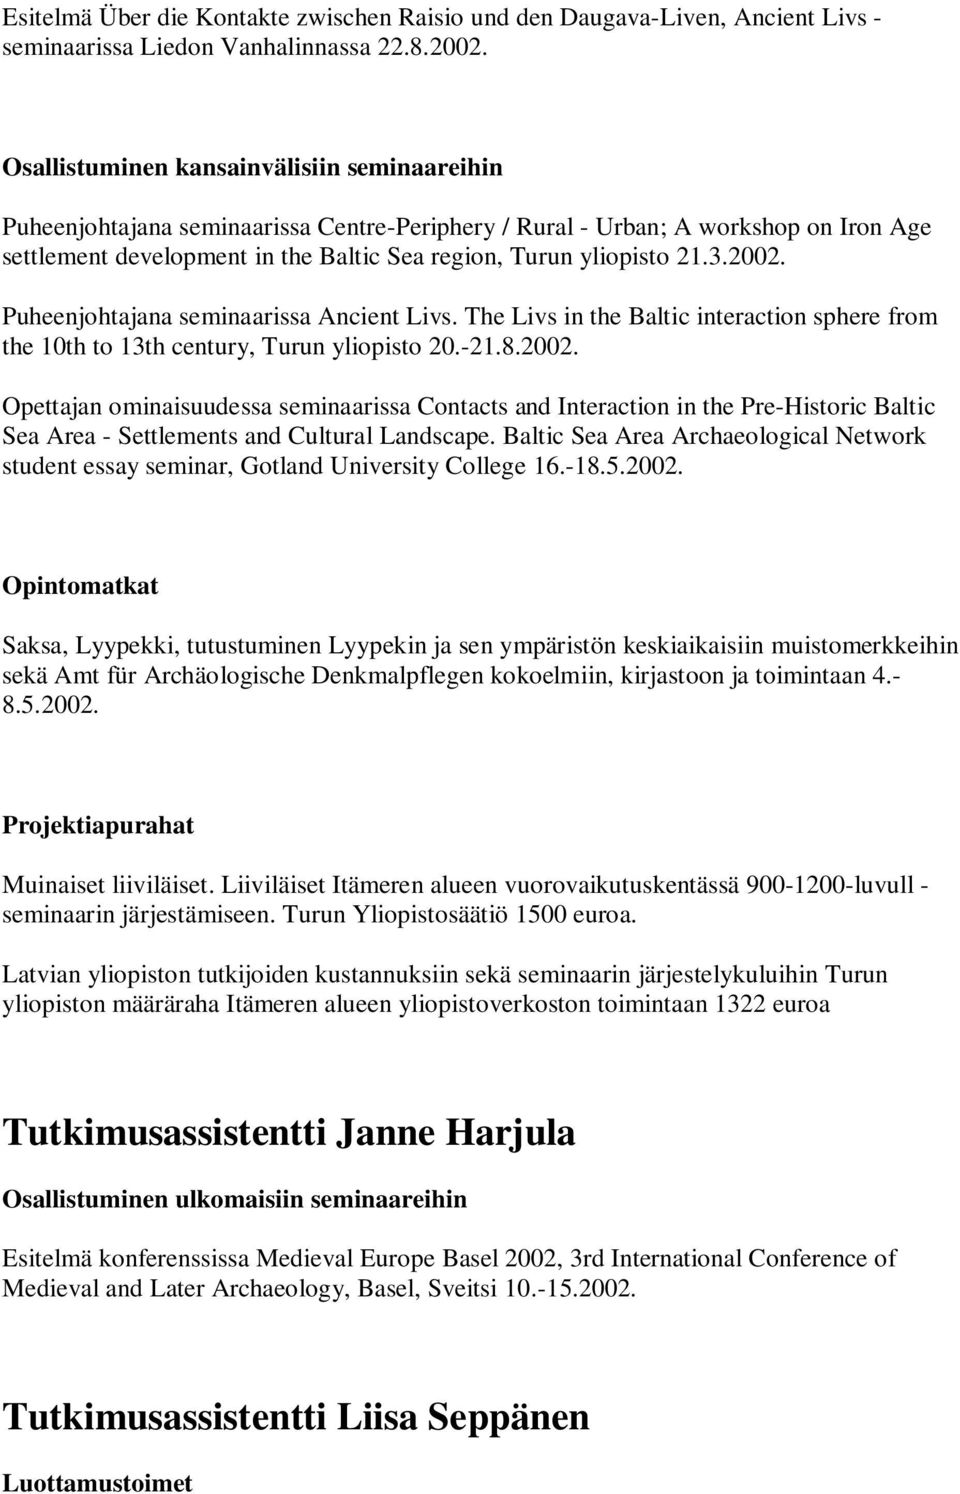 3.2002. Puheenjohtajana seminaarissa Ancient Livs. The Livs in the Baltic interaction sphere from the 10th to 13th century, Turun yliopisto 20.-21.8.2002. Opettajan ominaisuudessa seminaarissa Contacts and Interaction in the Pre-Historic Baltic Sea Area - Settlements and Cultural Landscape.